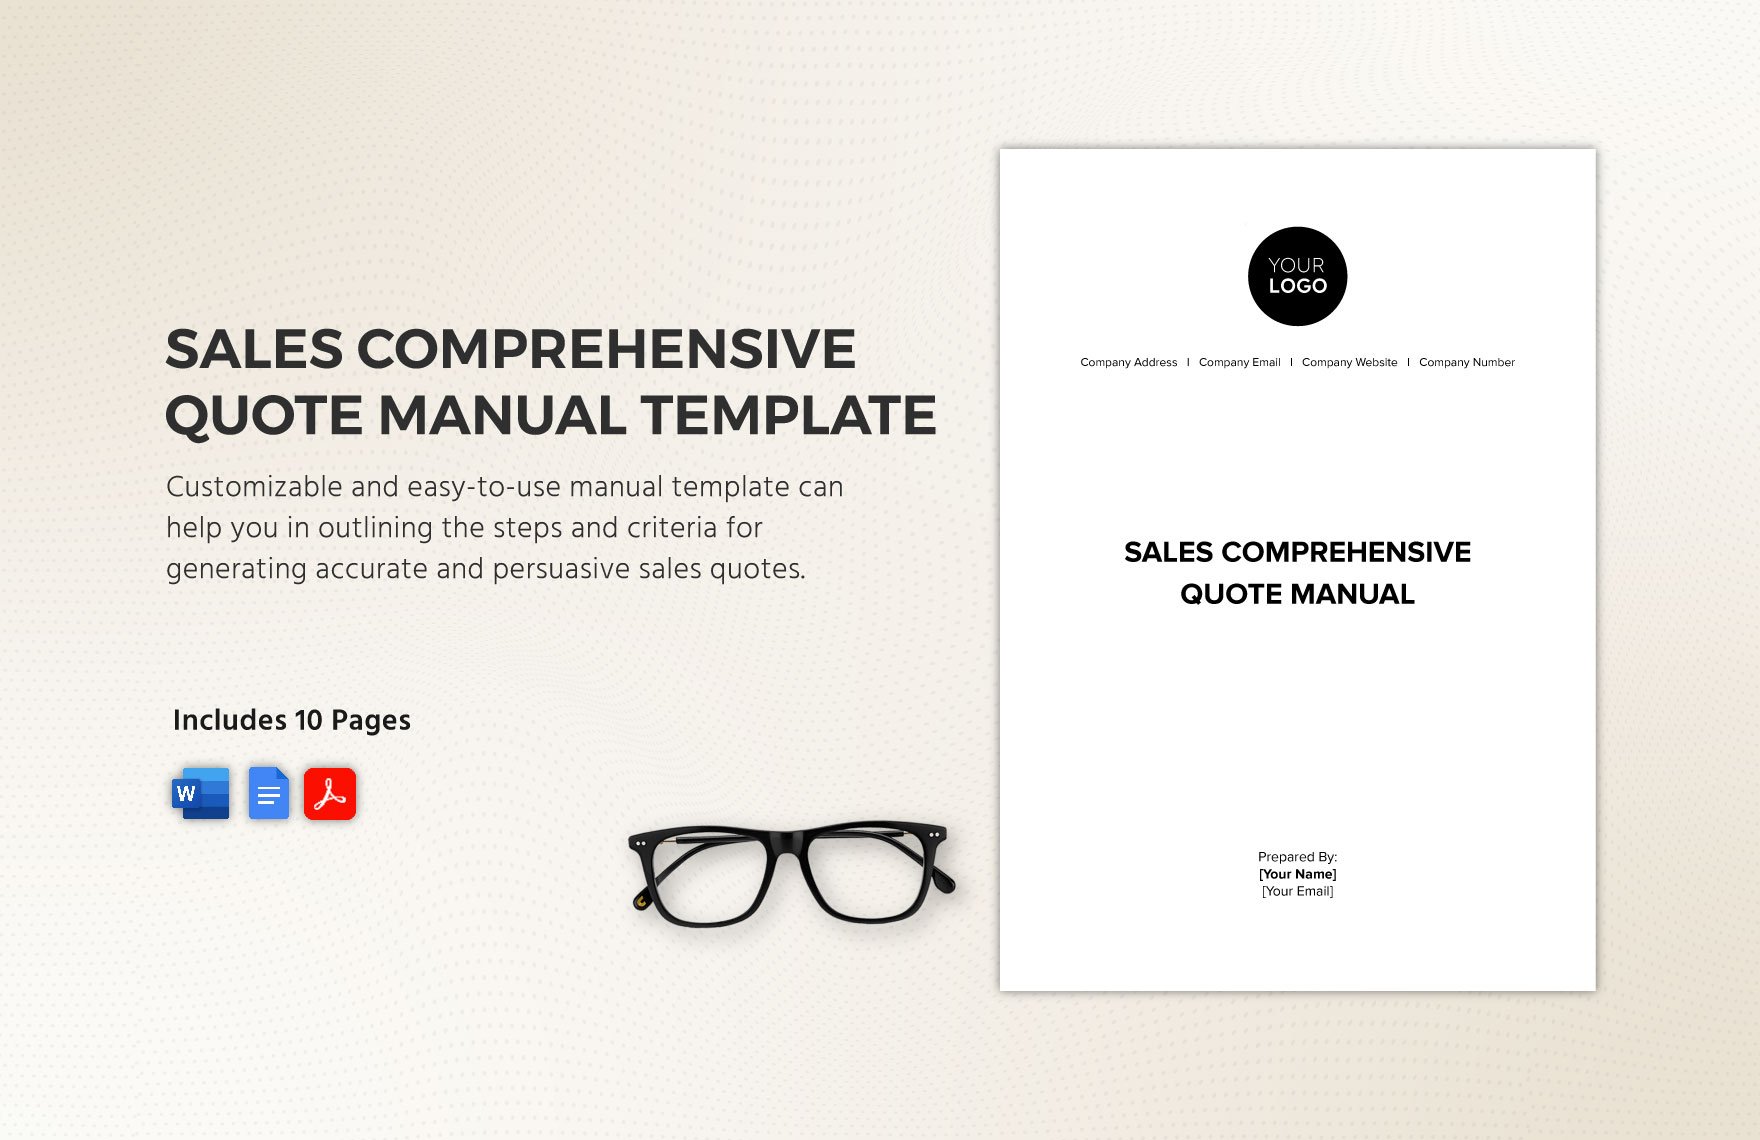 Sales Comprehensive Quote Manual Template in Word, Google Docs, PDF